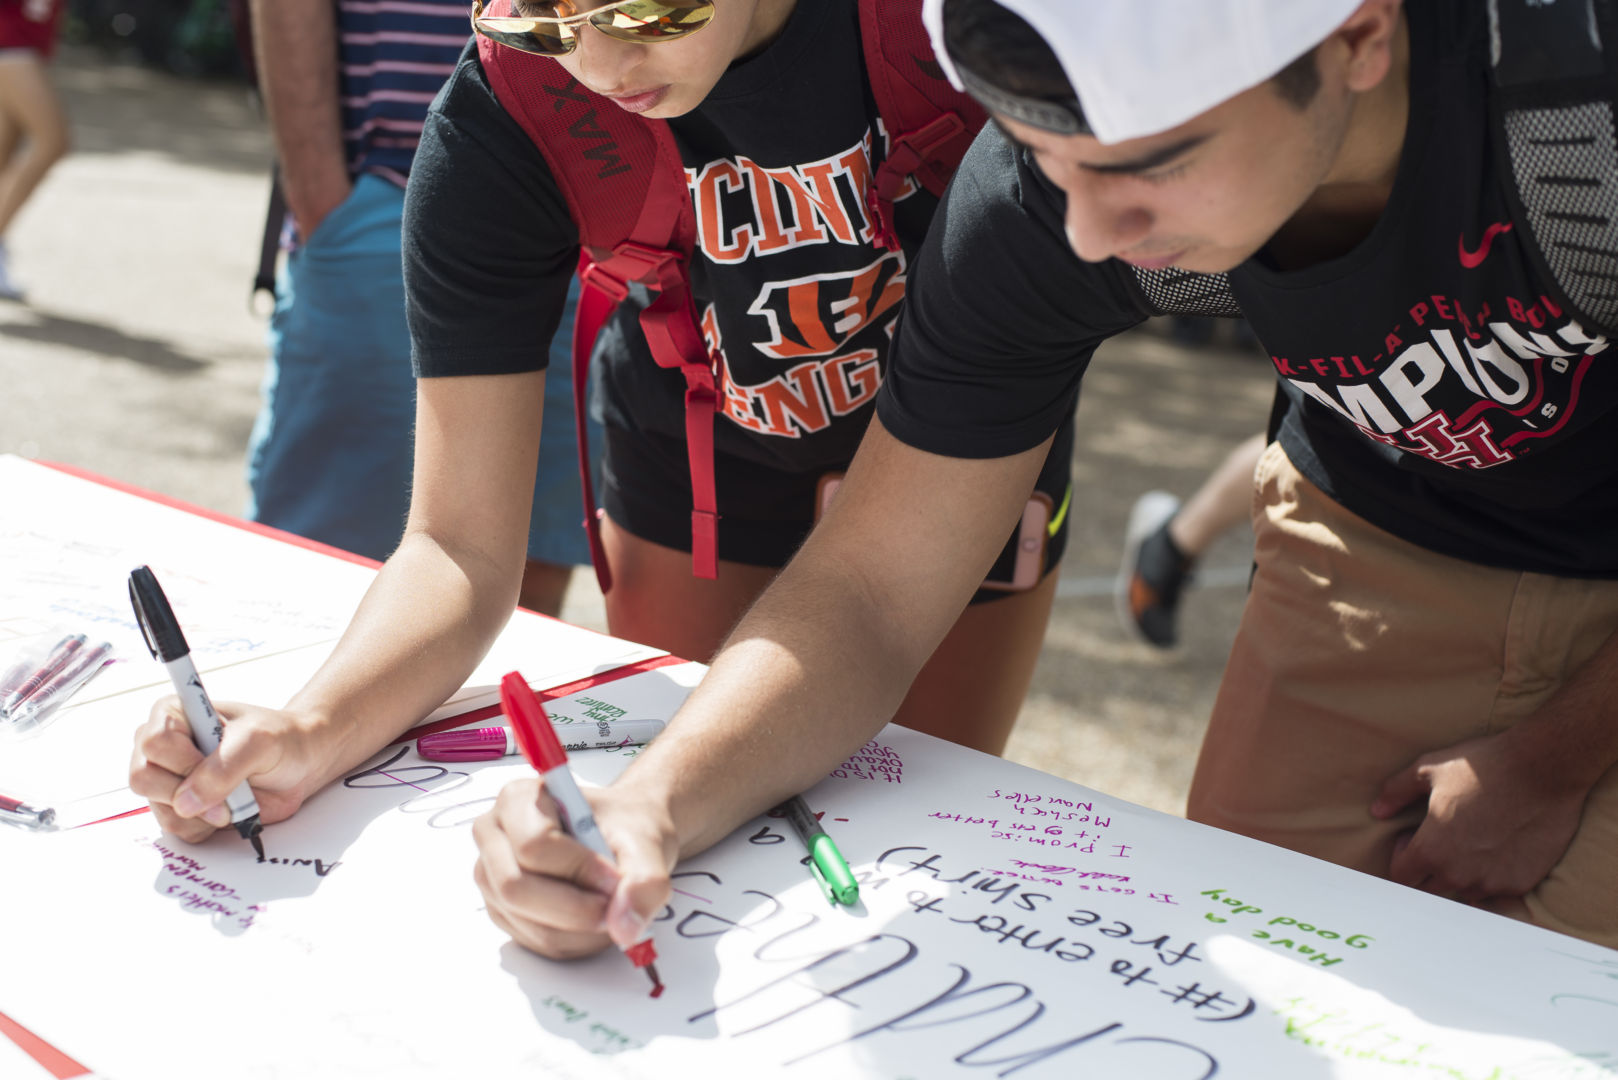 Students at Butler Plaza were invited to pledge to "end the stigma" of mental illness. | Justin Cross/The Cougar